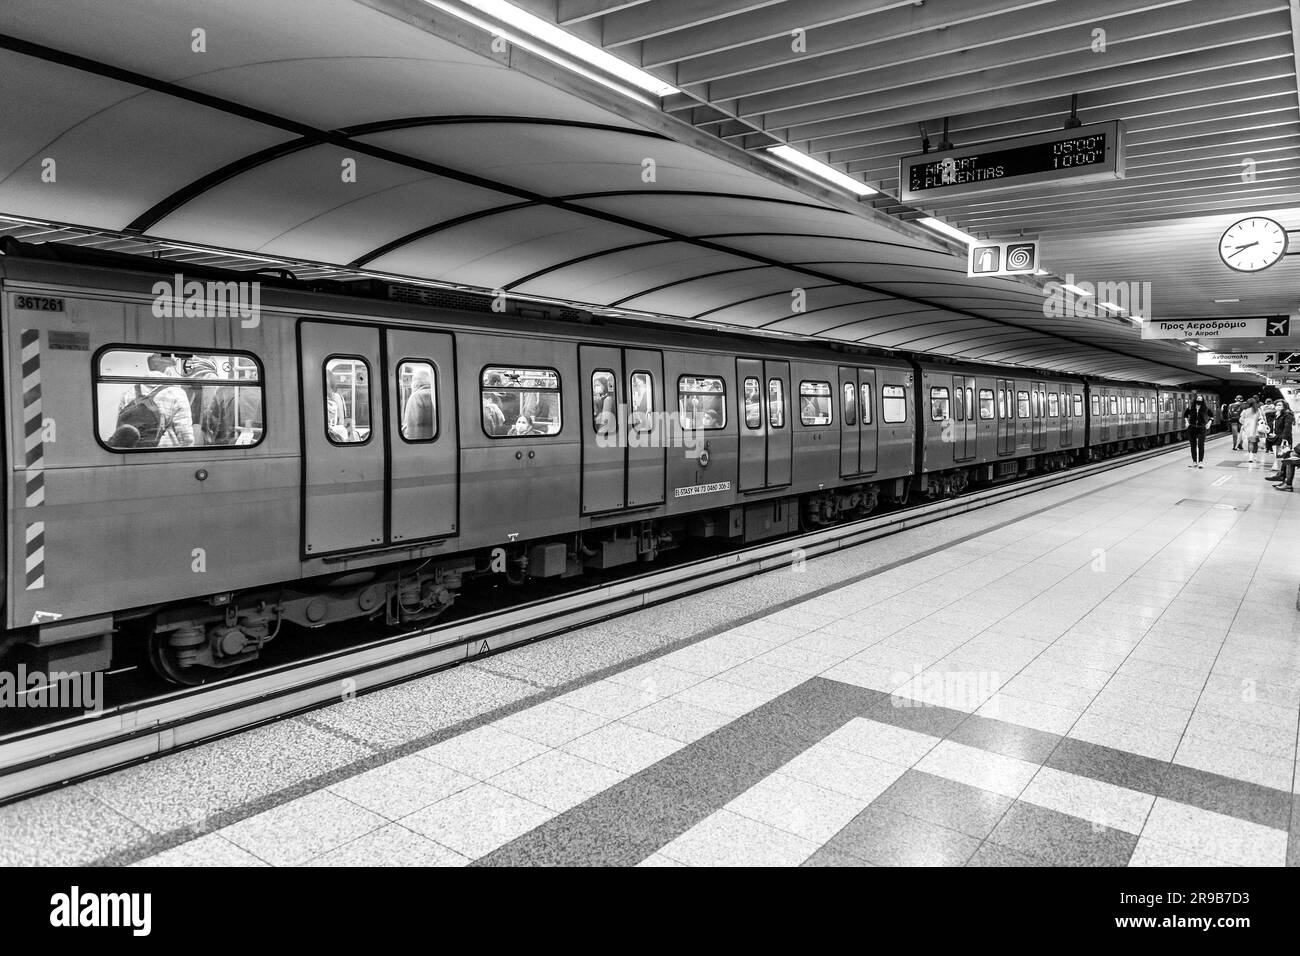 Athens, GR - 27 Nov 2021: Inside of the Athens metro. The Athens Metro is a rapid-transit system in Greece which serves the Athens urban area and part Stock Photo